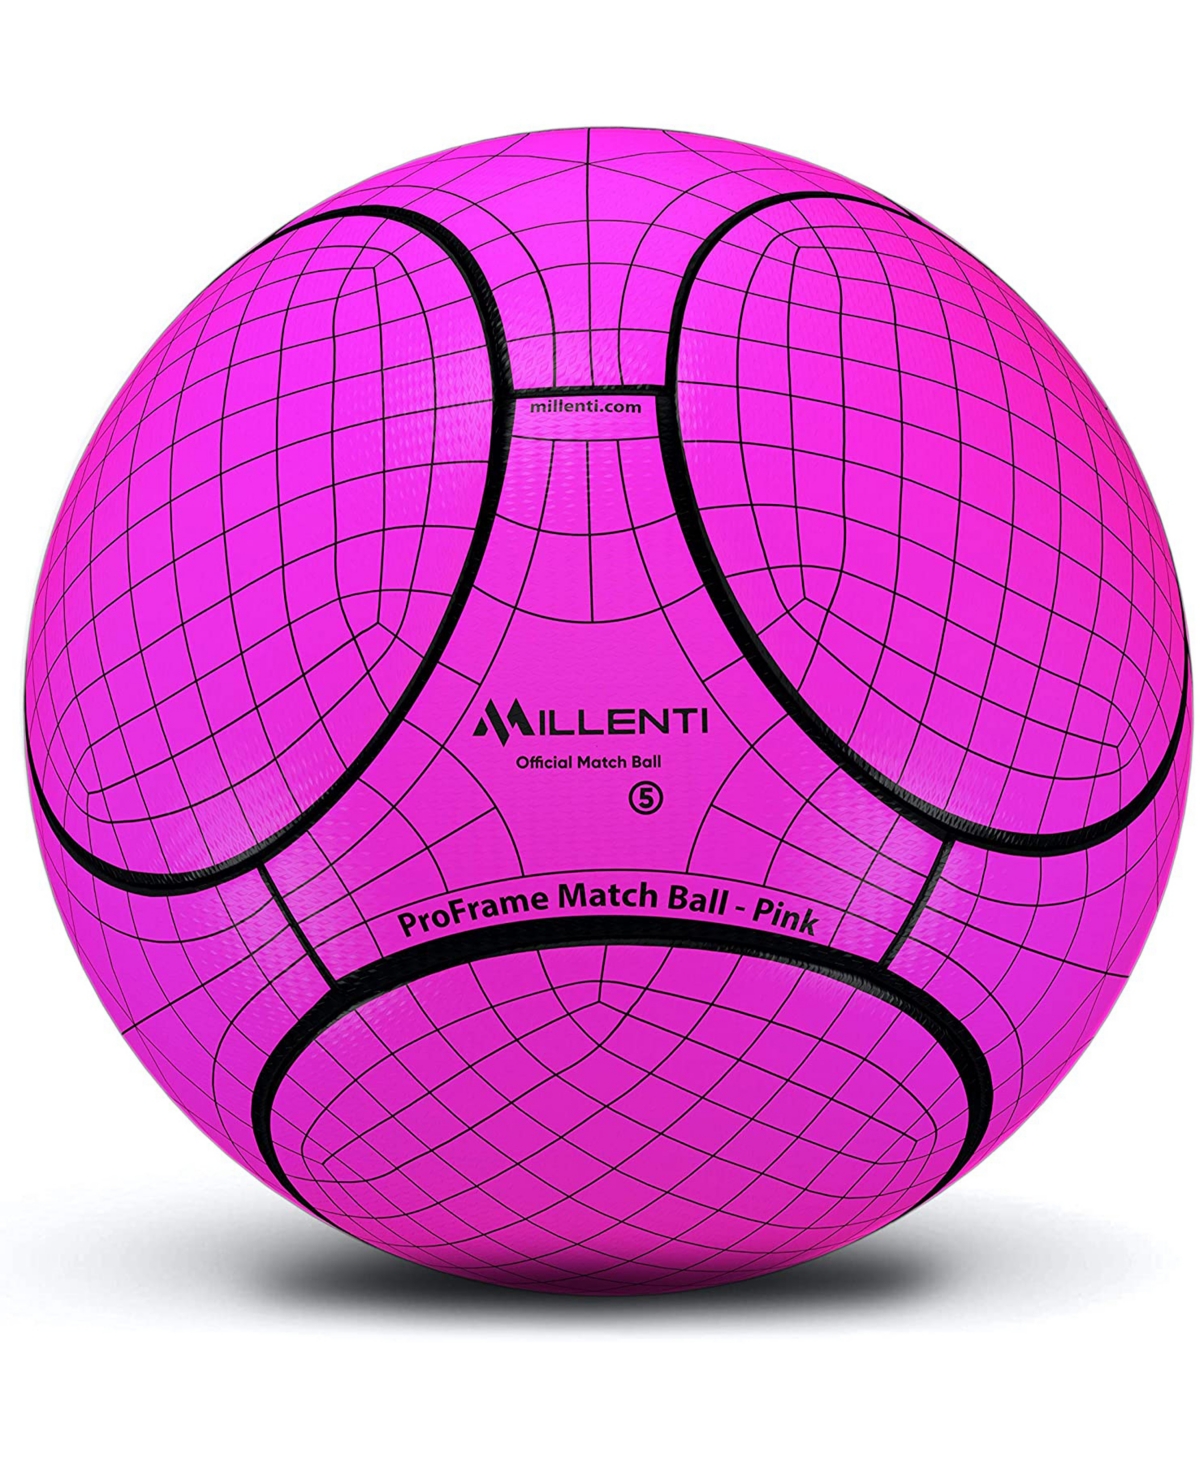 Millenti Us Soccer Ball Official Size 5 - Reverse Bend-it Soccer Ball With High-visibility, Easy-to-track Pro In Pink